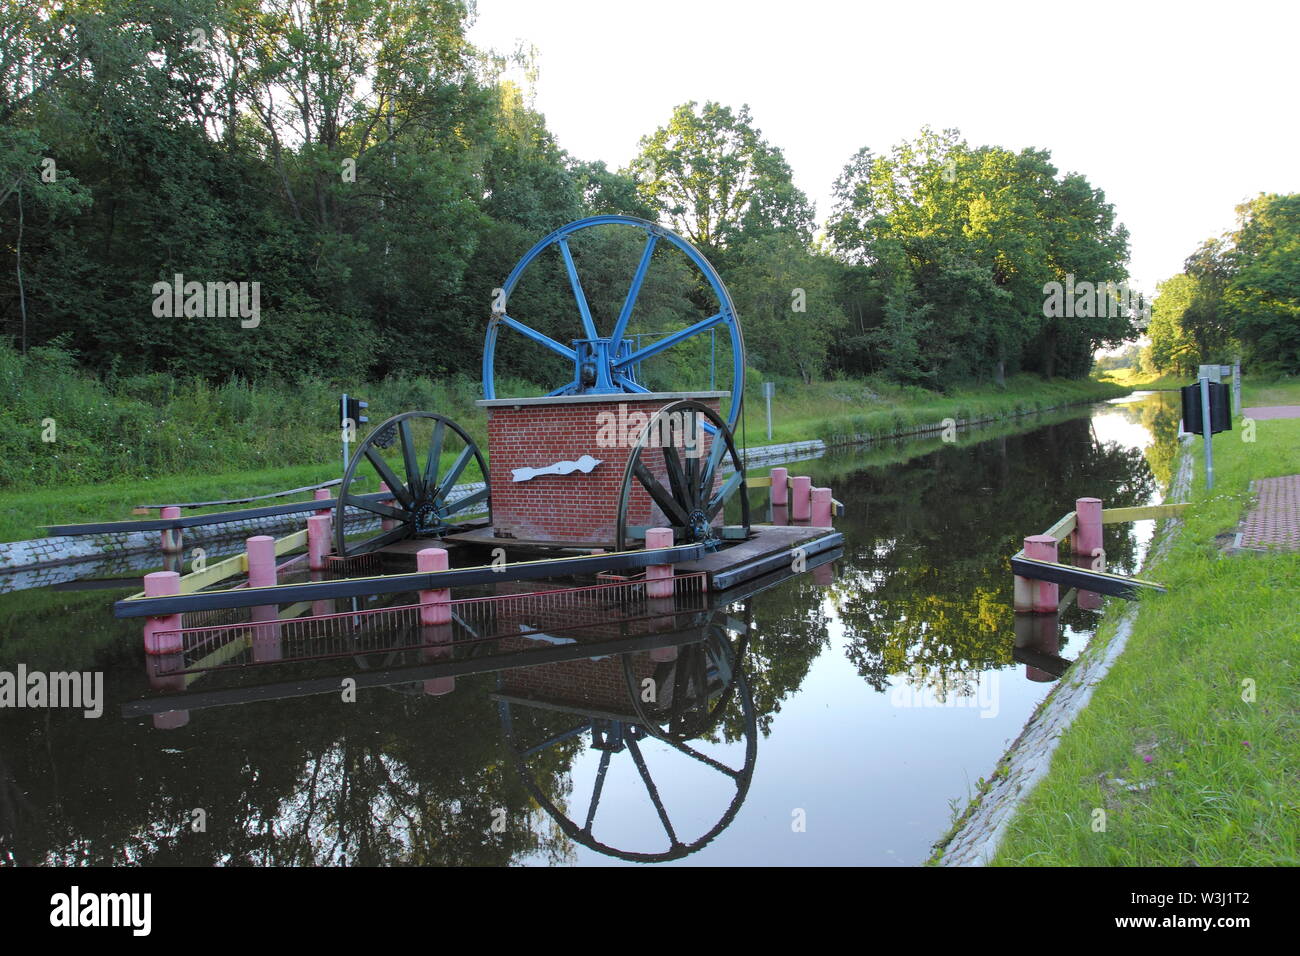 The Inclined Planes and carriage in Buczyniec, Machinery for ships transporting over hills, Unesco memorial to world culture. Poland, Elblag Canal (Ob Stock Photo